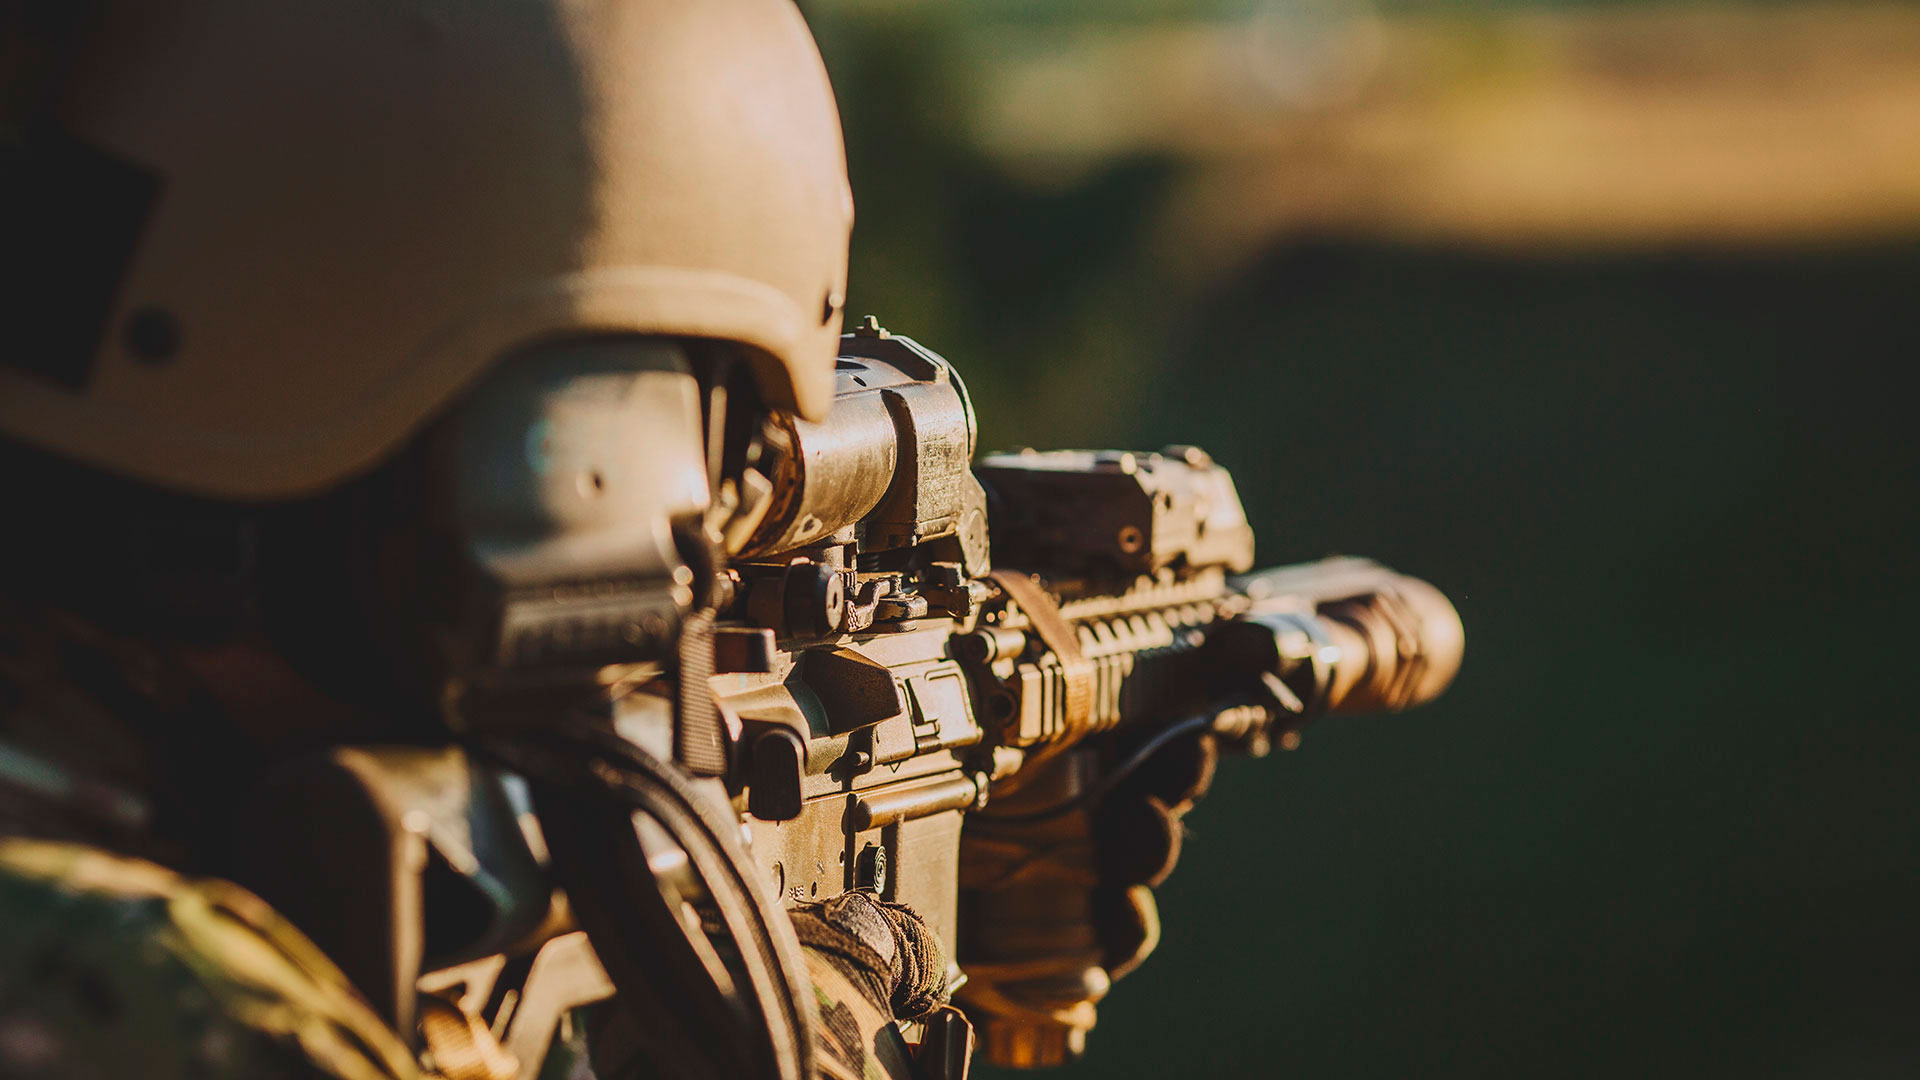 The back view of a Sniper about to take a shot